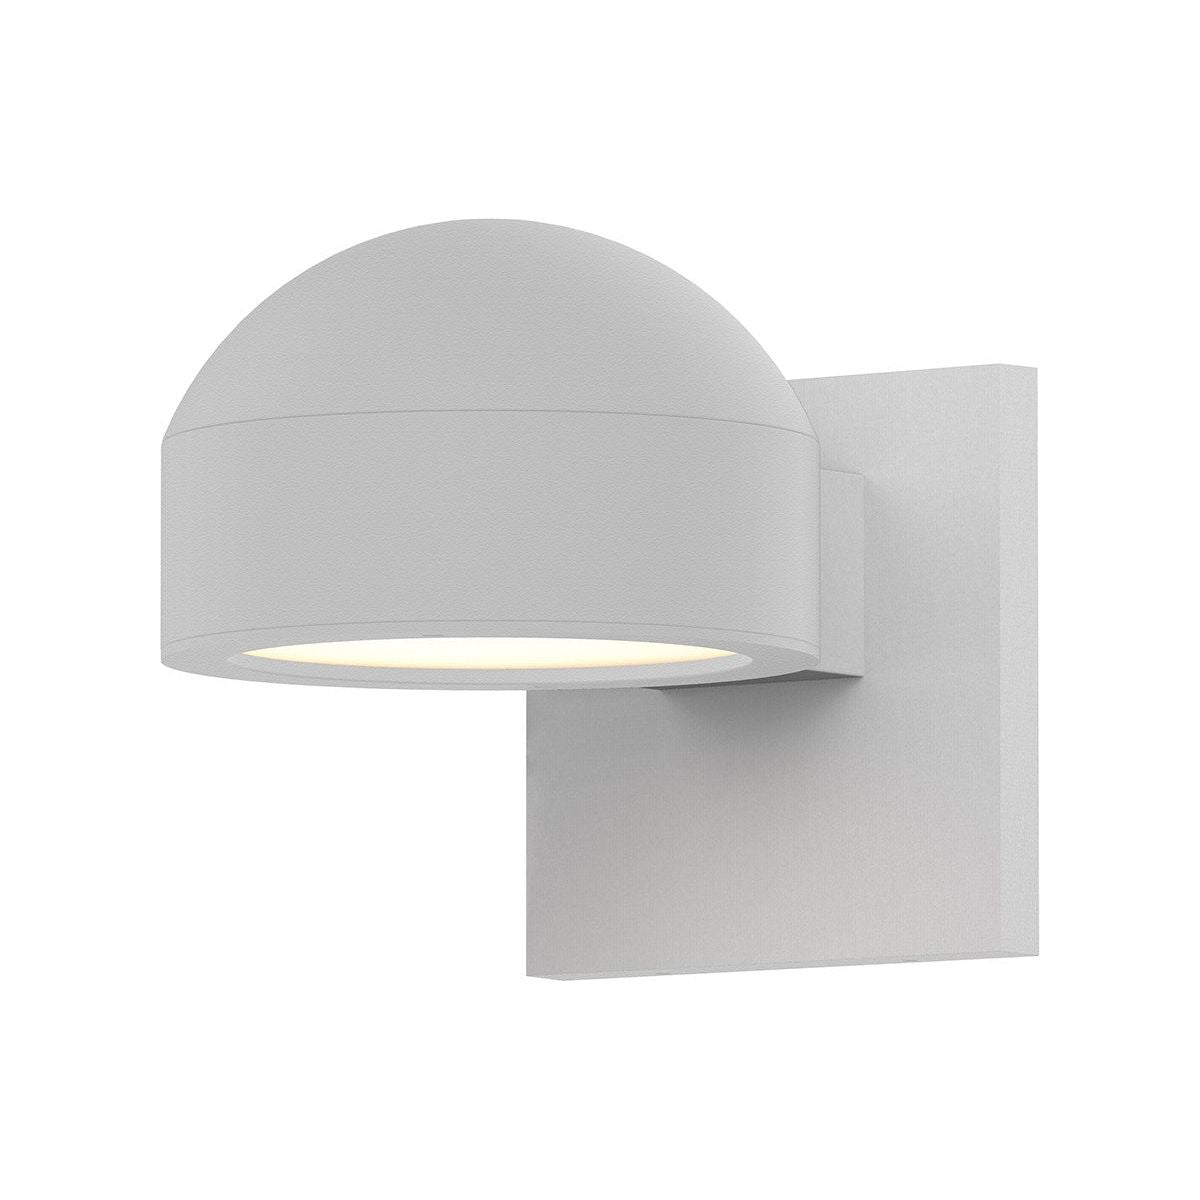 REALS Downlight LED Sconce with Dome Cap and Plate Lens